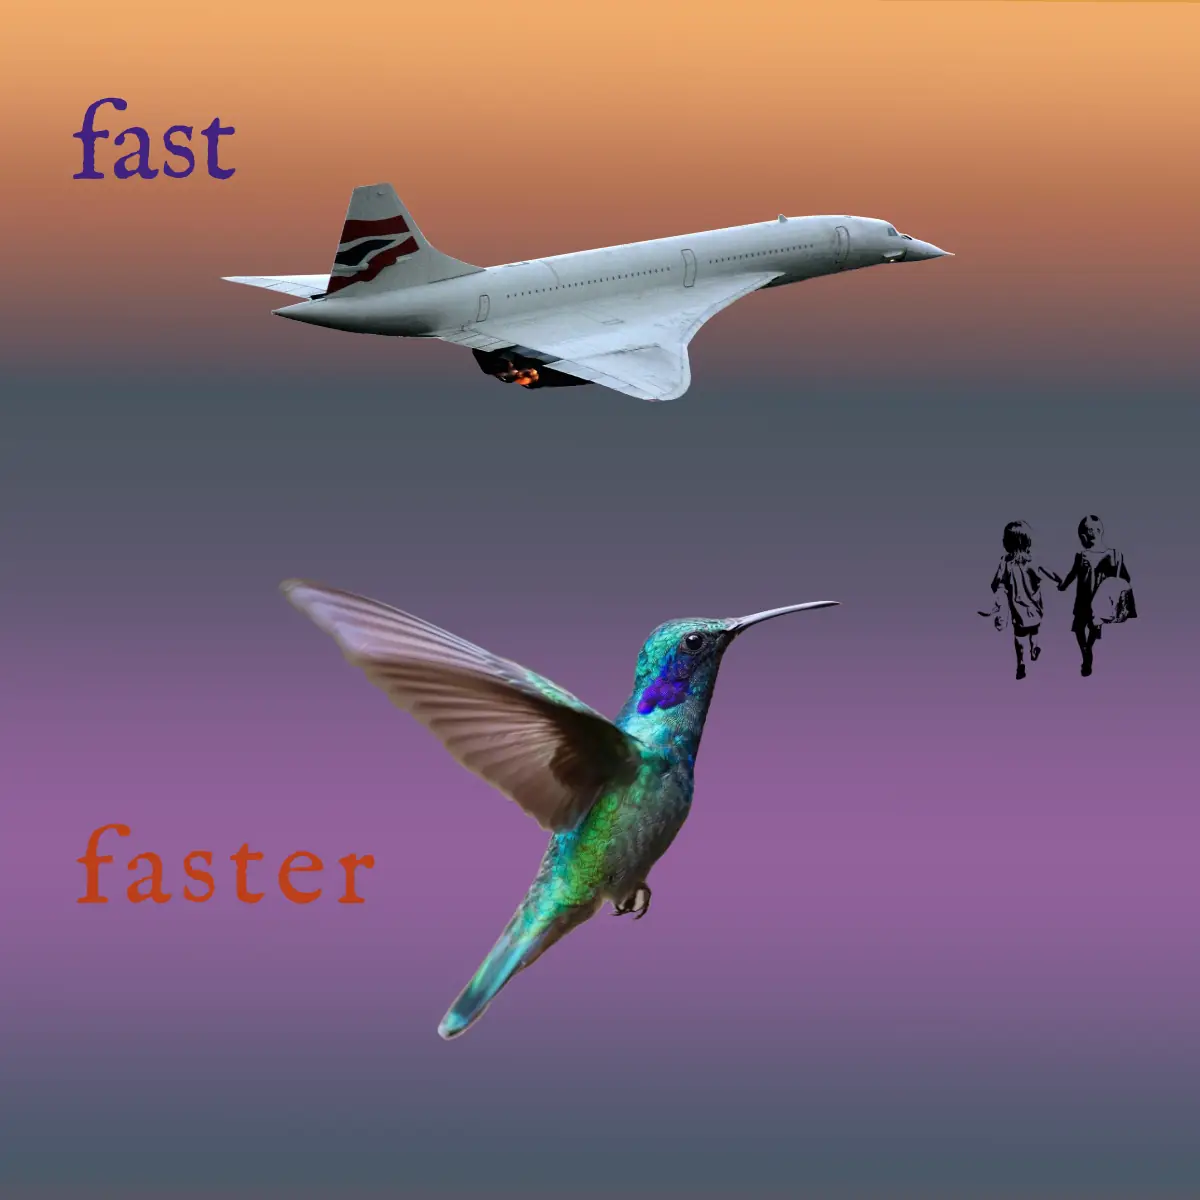 A concord jet is flying left to right in the image with the word faster in text above it. A hummingbird is pictured hovering below the jet with the word faster beside it. The hummingbird and the jet are the same size visually and are superimposed on a background that fades from sunset orange to a purple from top to bottom. As always, the two Para Los Dos kids can be found holding hands somewhere in the image.